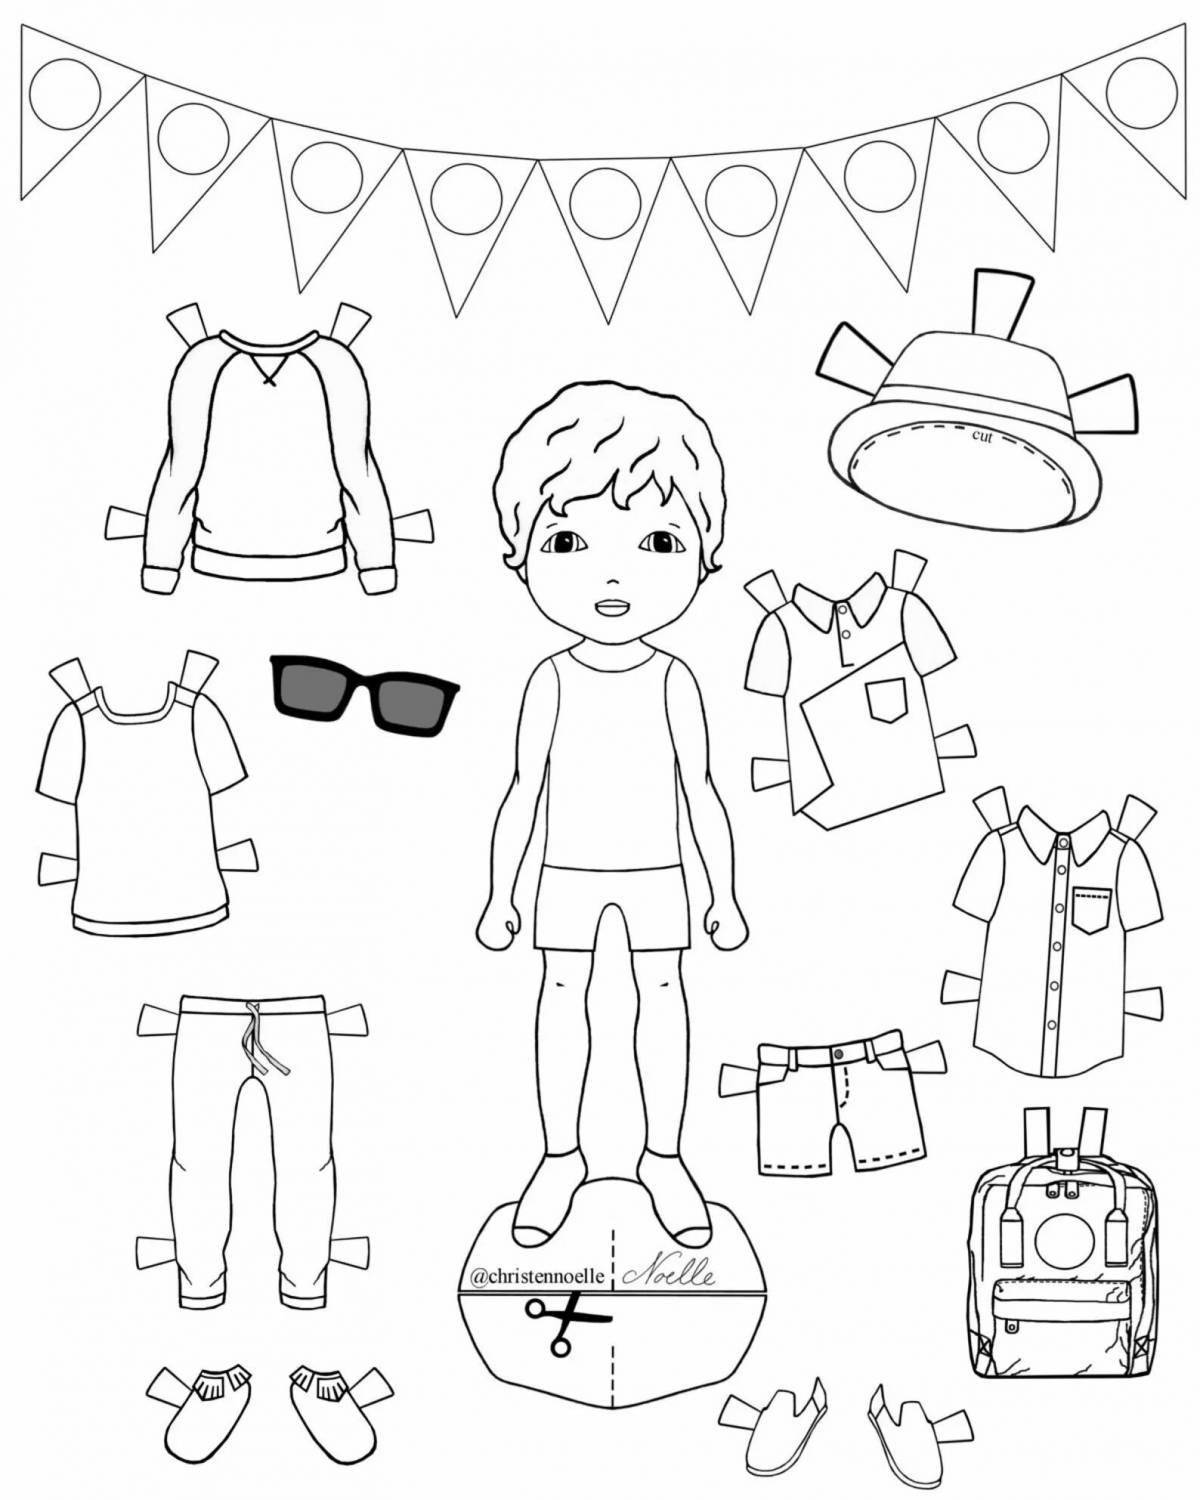 Amazing coloring book of a girl in clothes